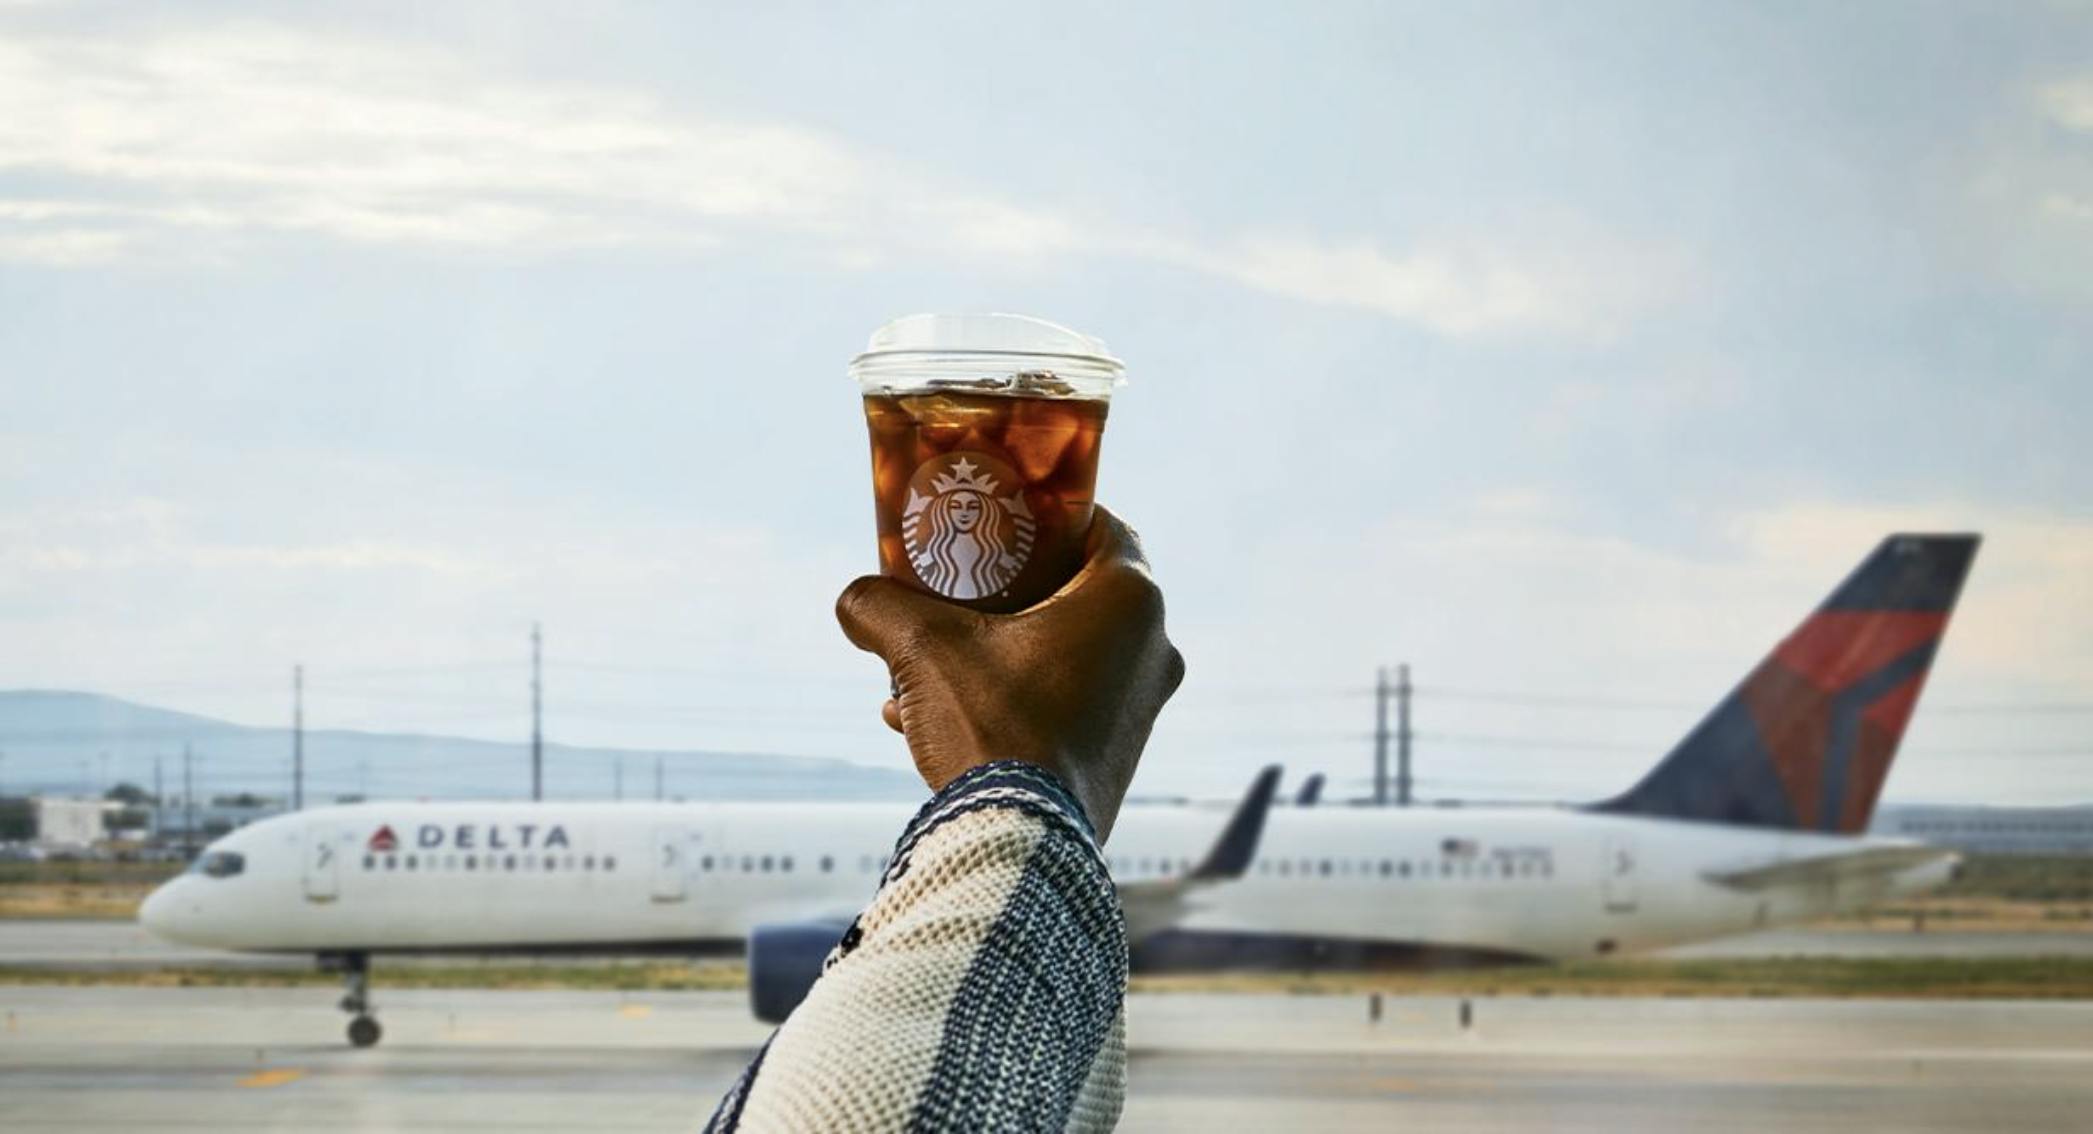 A hand holding a Starbucks coffee cup in front of a Delta Airlines plane